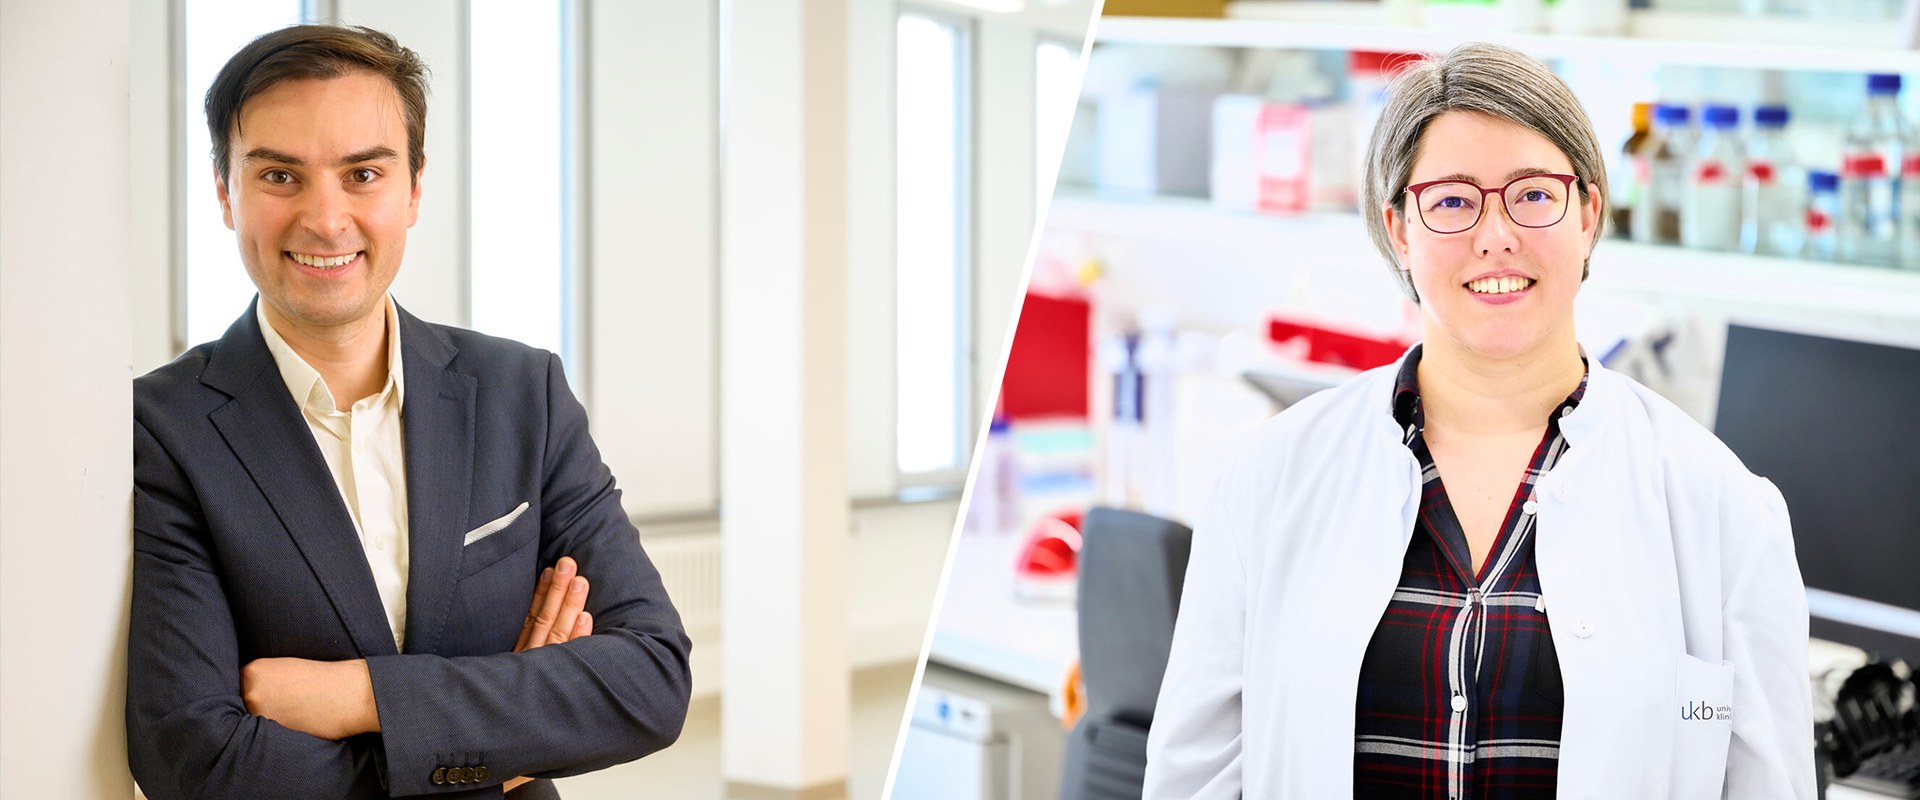 Left: Dr. Dragomir Milovanovic, Group Research Lead at the German Center for Neurodegenerative Illnesses (DZNE), headquarters in Berlin. Right: Prof. Kathrin Leppek, RNA-Biochemist and Group Research Lead at the Institute for Clinical Chemistry and Clinical Pharmacology at the University Hospital Bonn.